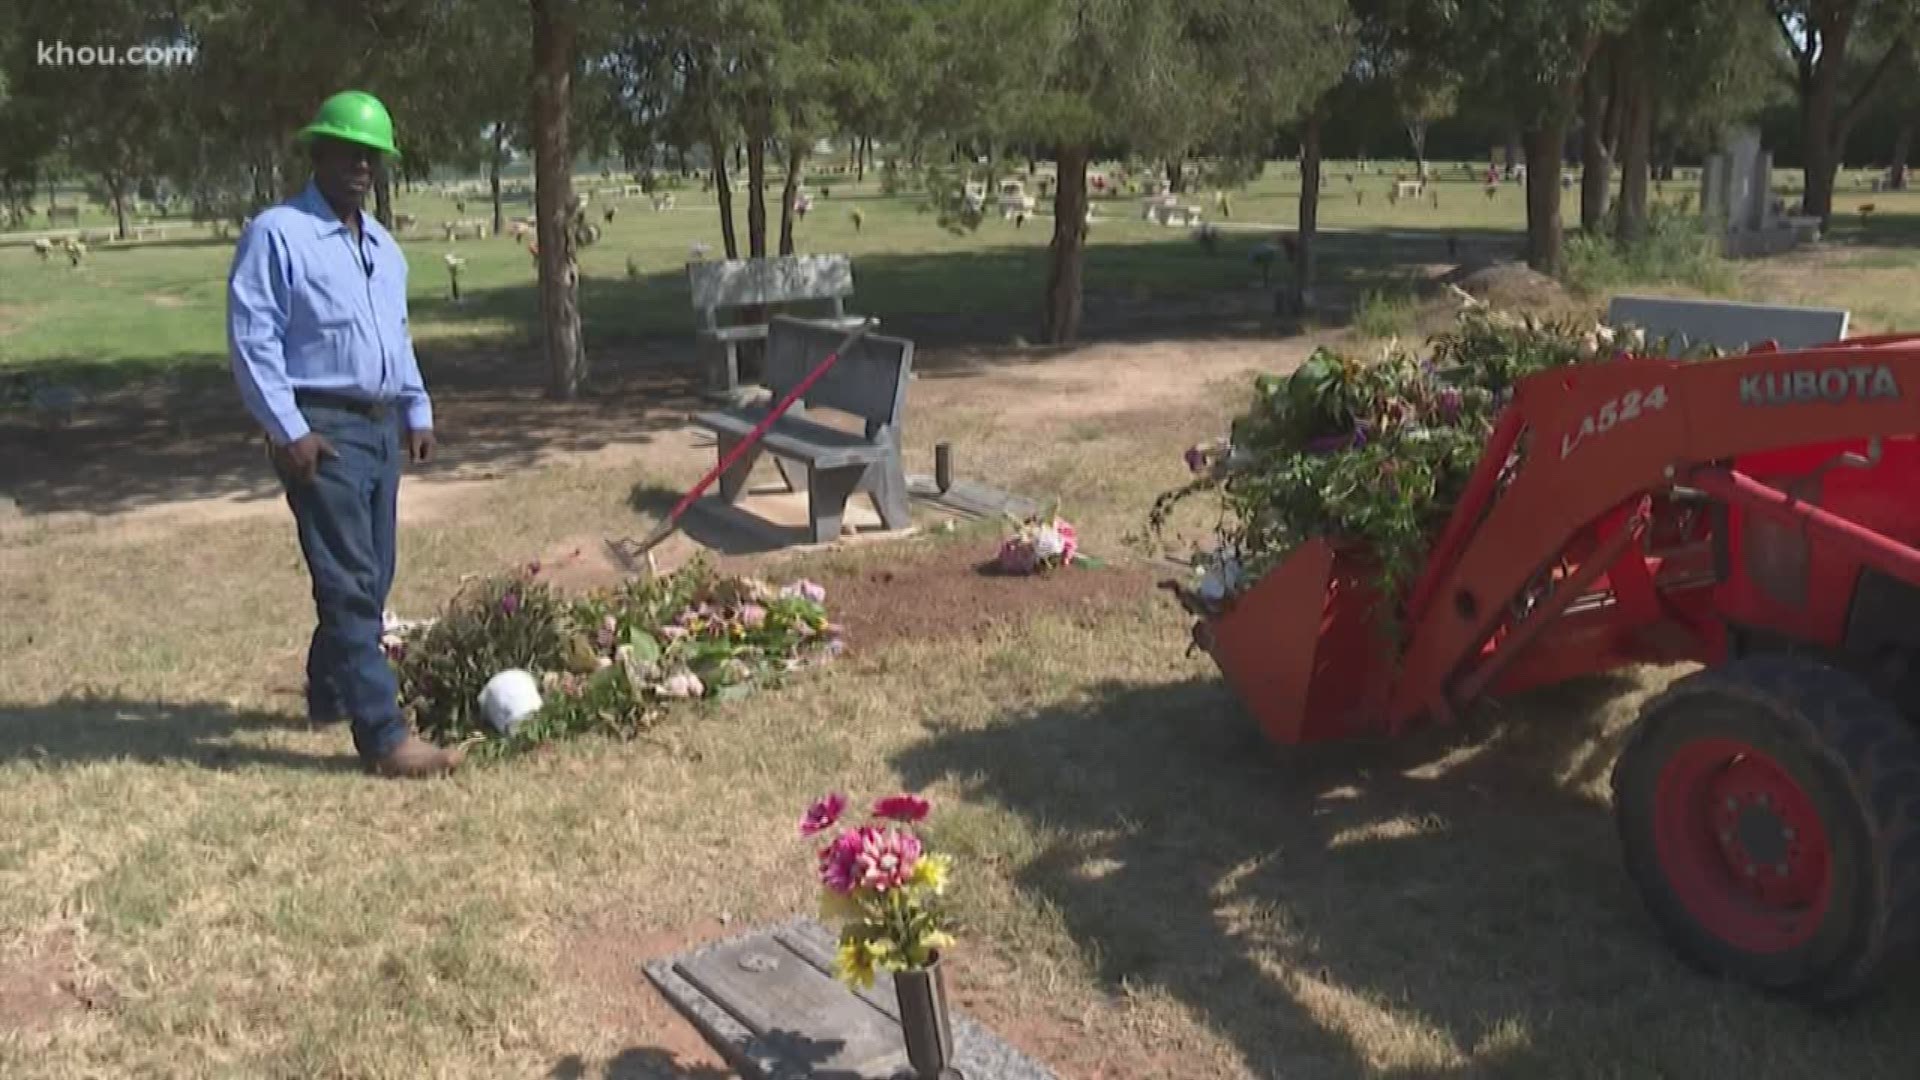 A Sugar Land man whose family has an extra plot in a cemetery in Odessa is offering the plot to families who lost loved ones in the senseless mass shootings.